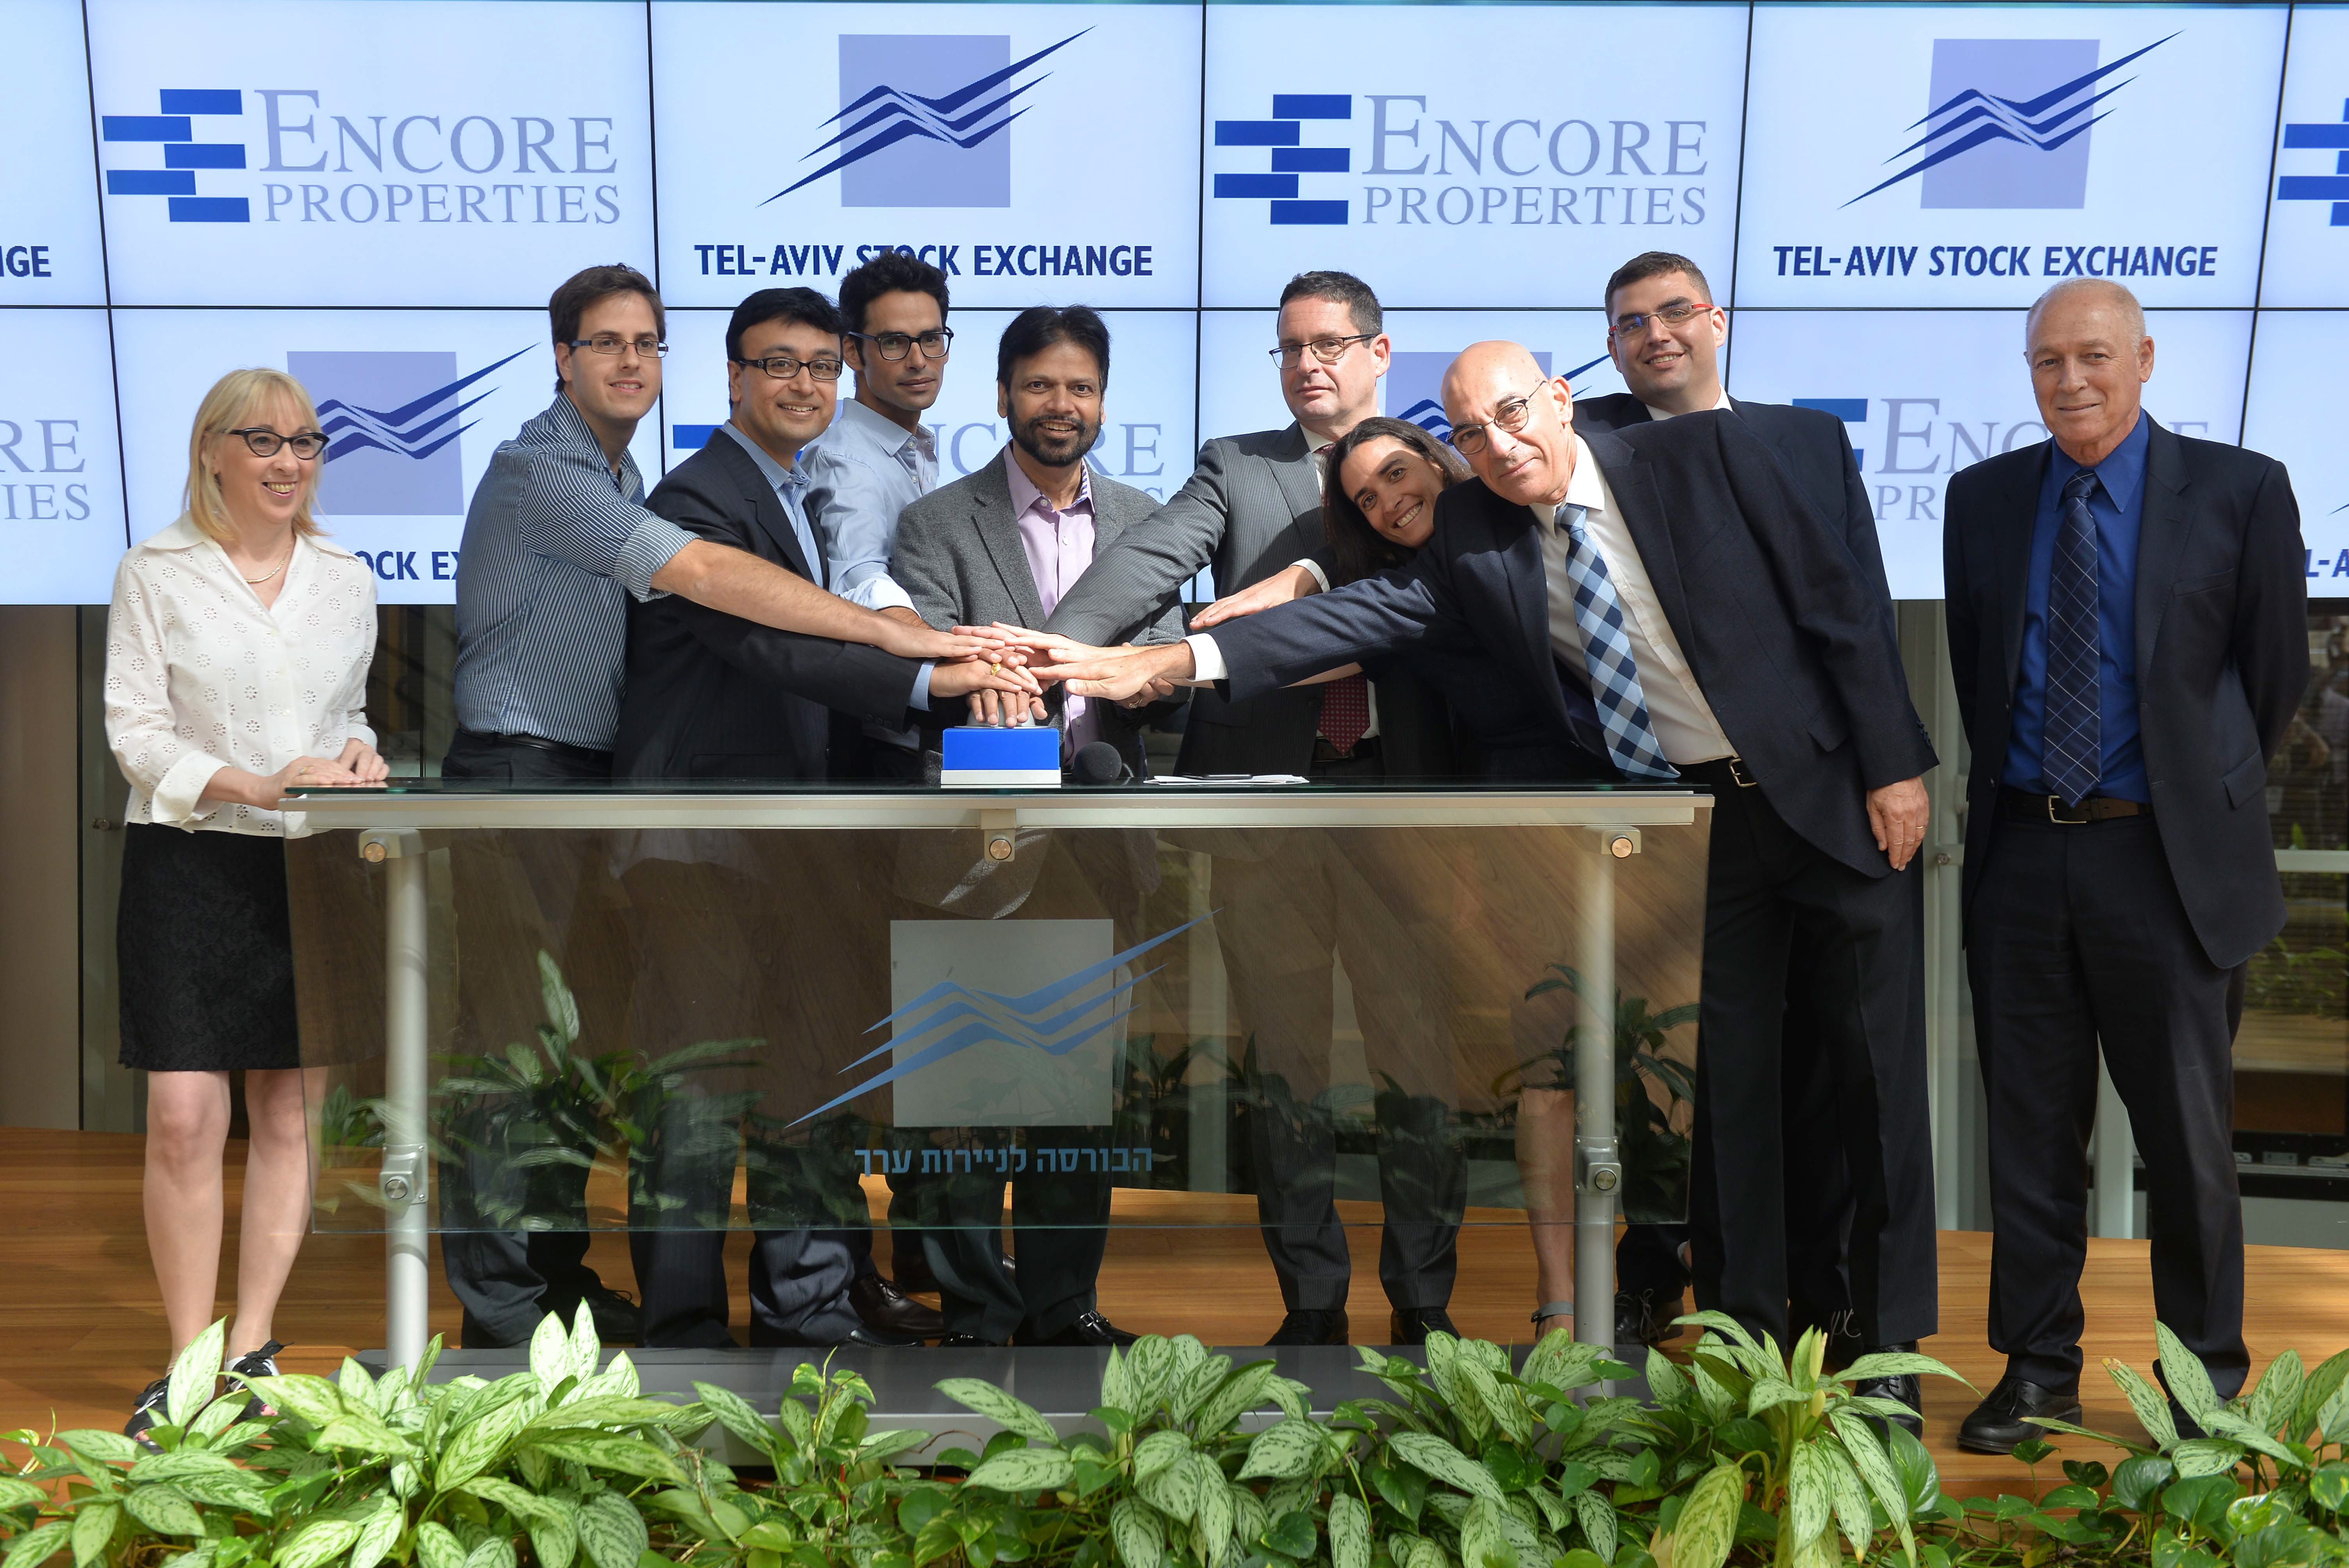 Management of Encore Properties Opened Trading 